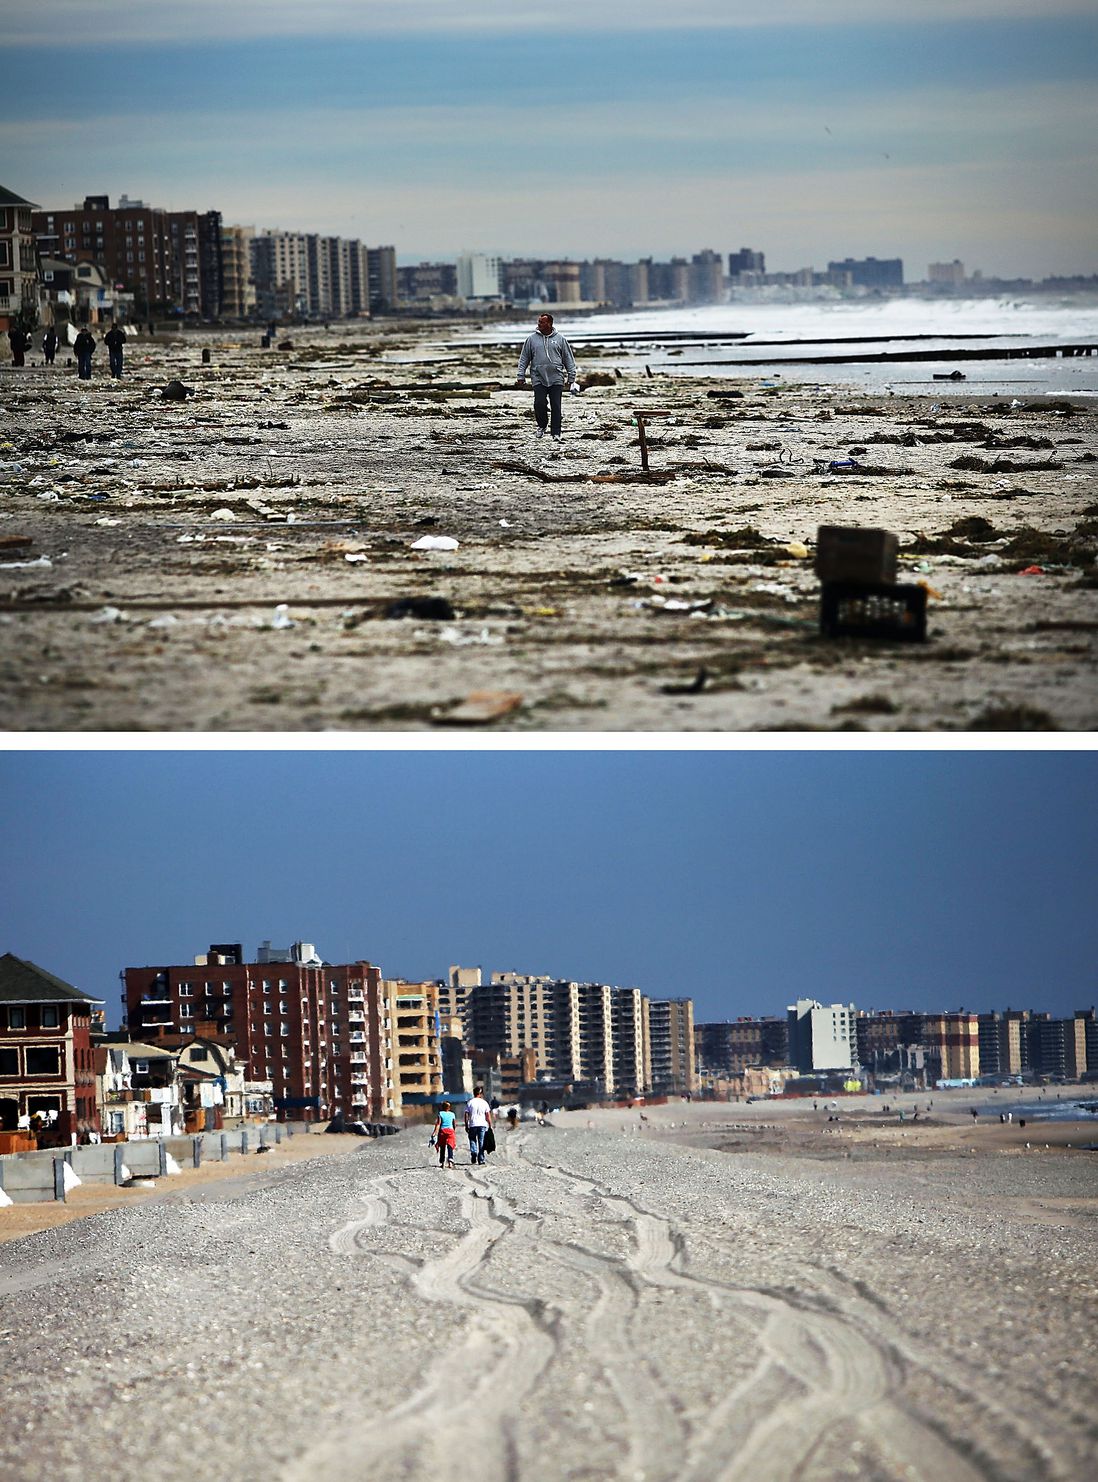 [Top] A man walks along the heavily damaged beach on November 2, 2012 in Rockaway neighborhood of the Queens borough of New York City. [Bottom] People walk down the beach on October 23, 2013.